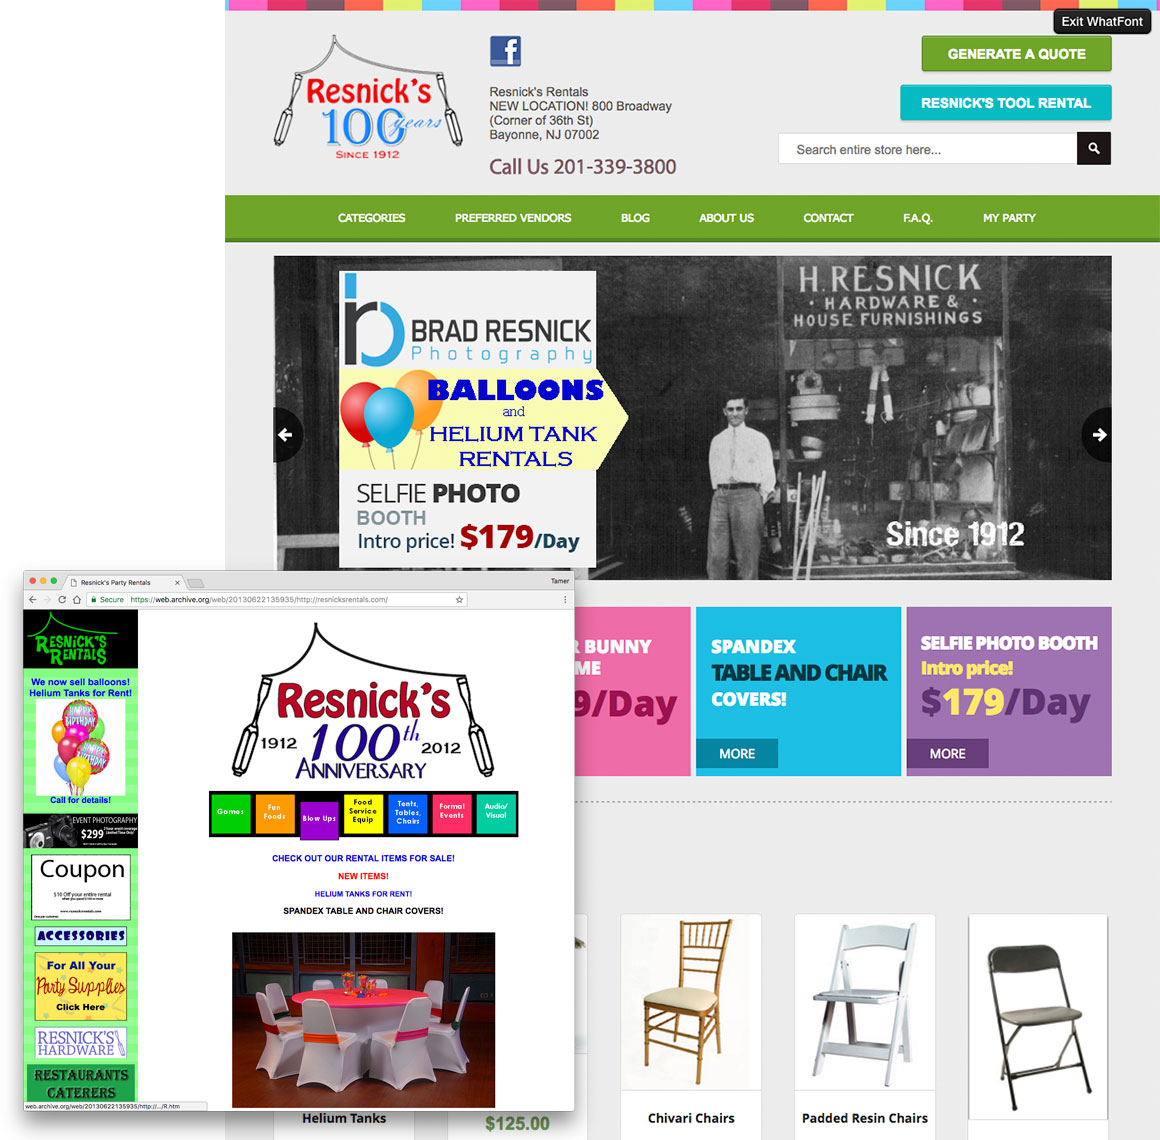 Resnick's rentals website before and after